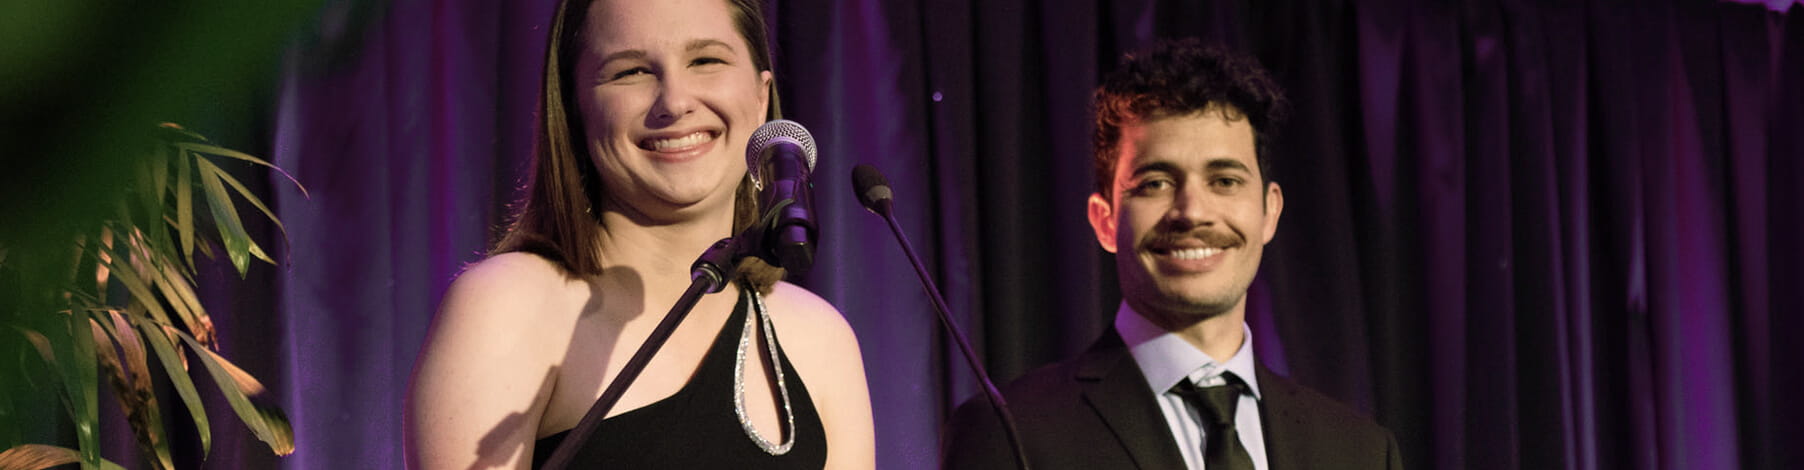 A woman in a black dress laughing beside a man in a suit, both standing on stage with a purple curtain backdrop.